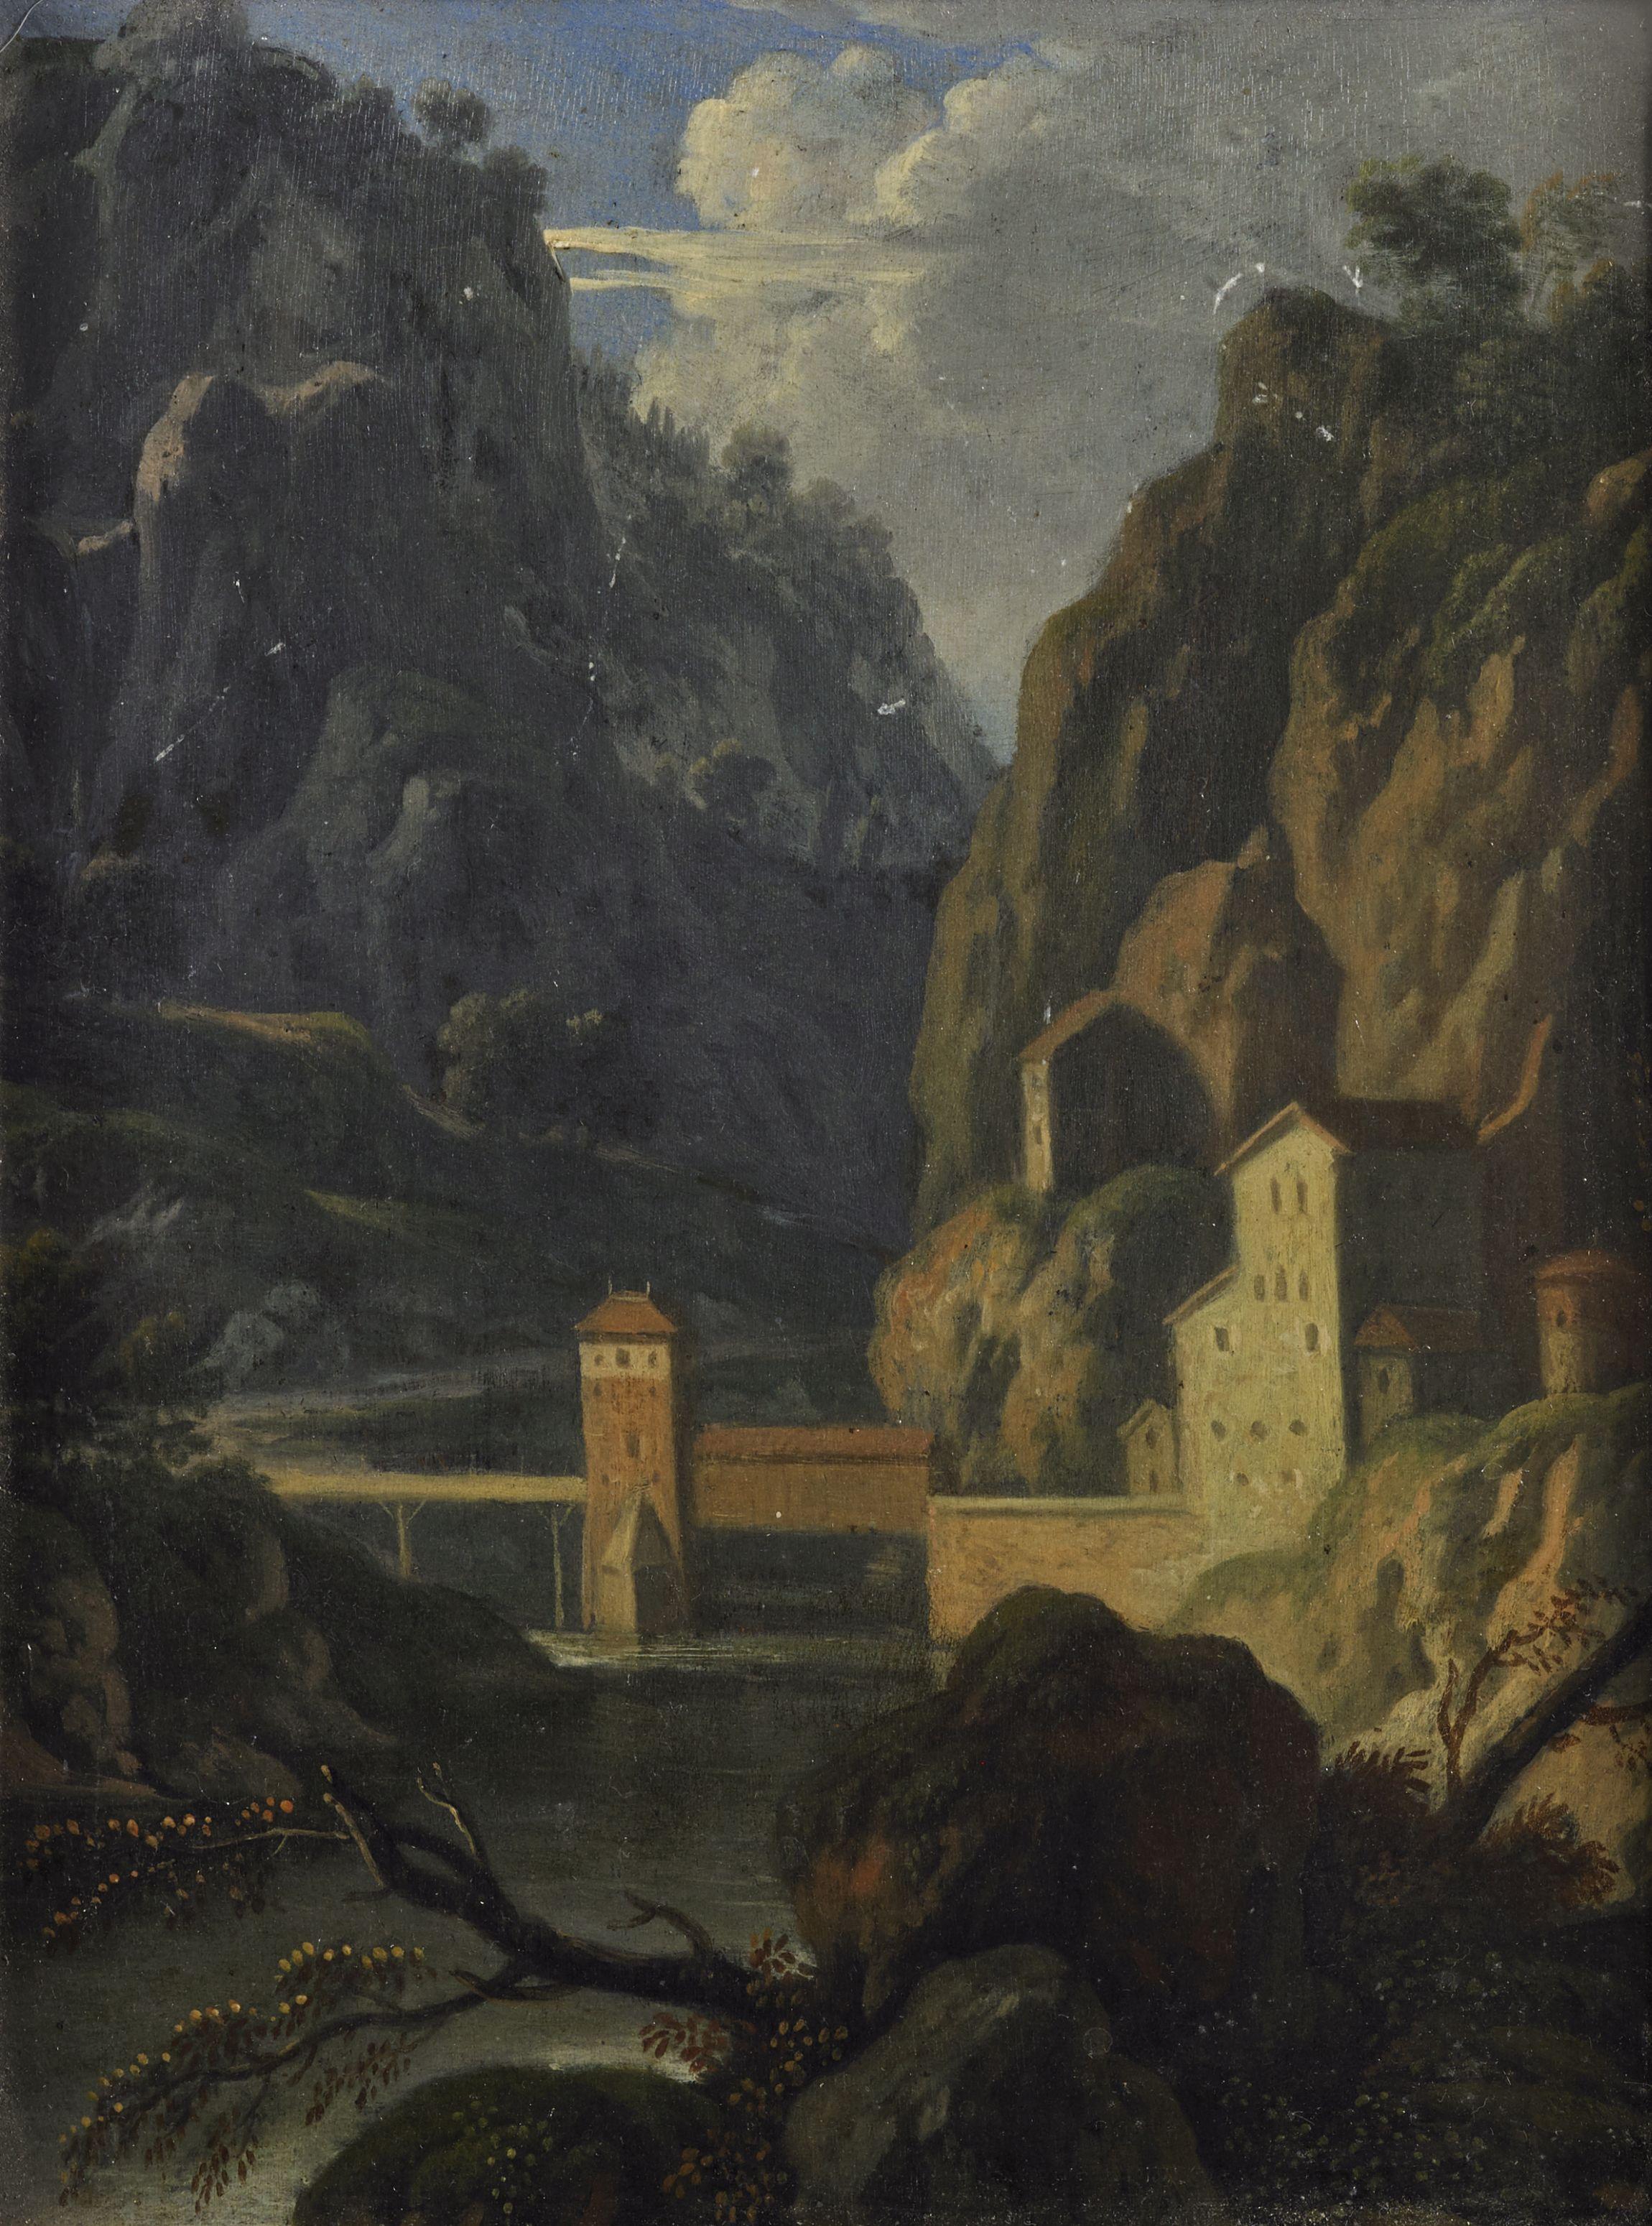 Painting, oil on panel, measuring 20 x 15 without frame and 35 x 30 with frame, depicting a landscape with a beautiful perspective and houses arranged on a mountain of the Flemish school from the mid-17th century.

The paintings and works of art